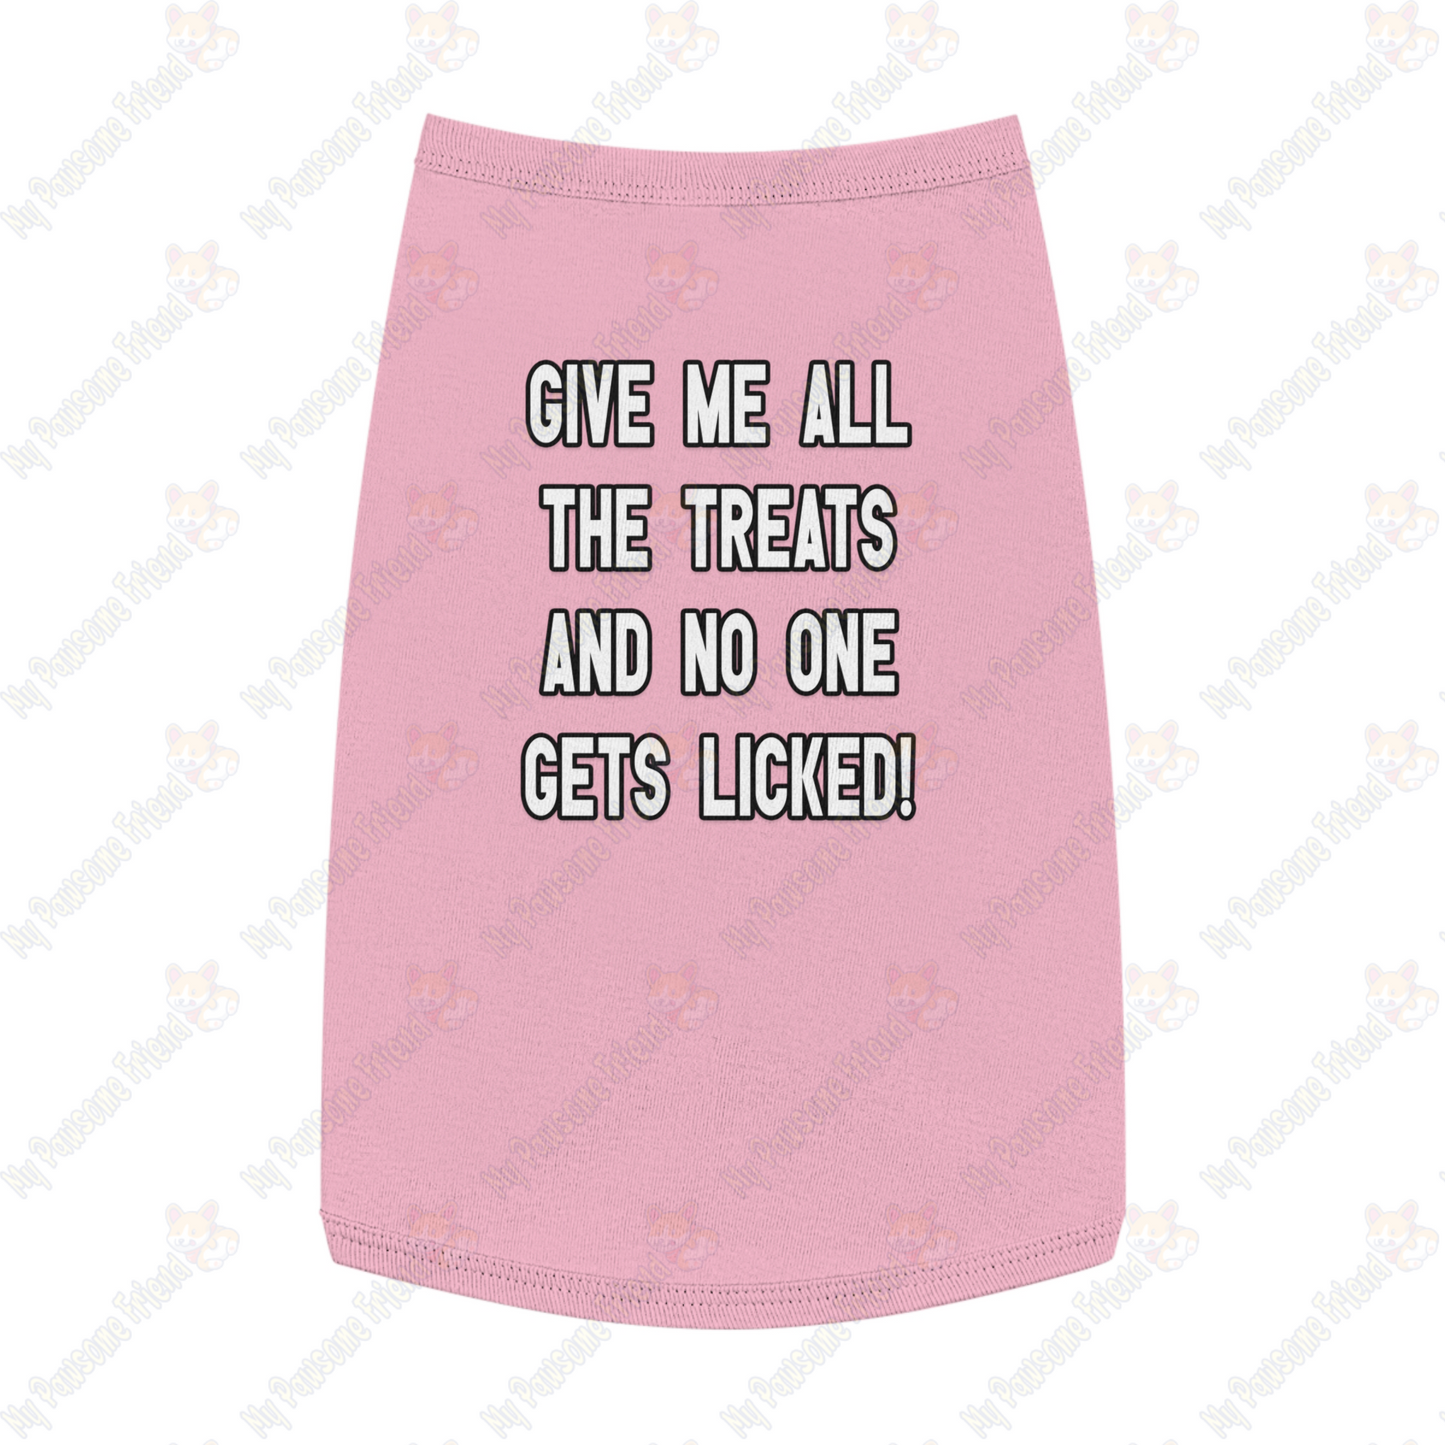 GIVE ME THE TREATS AND NO ONE GETS LICKED! Pet Tank Top pink